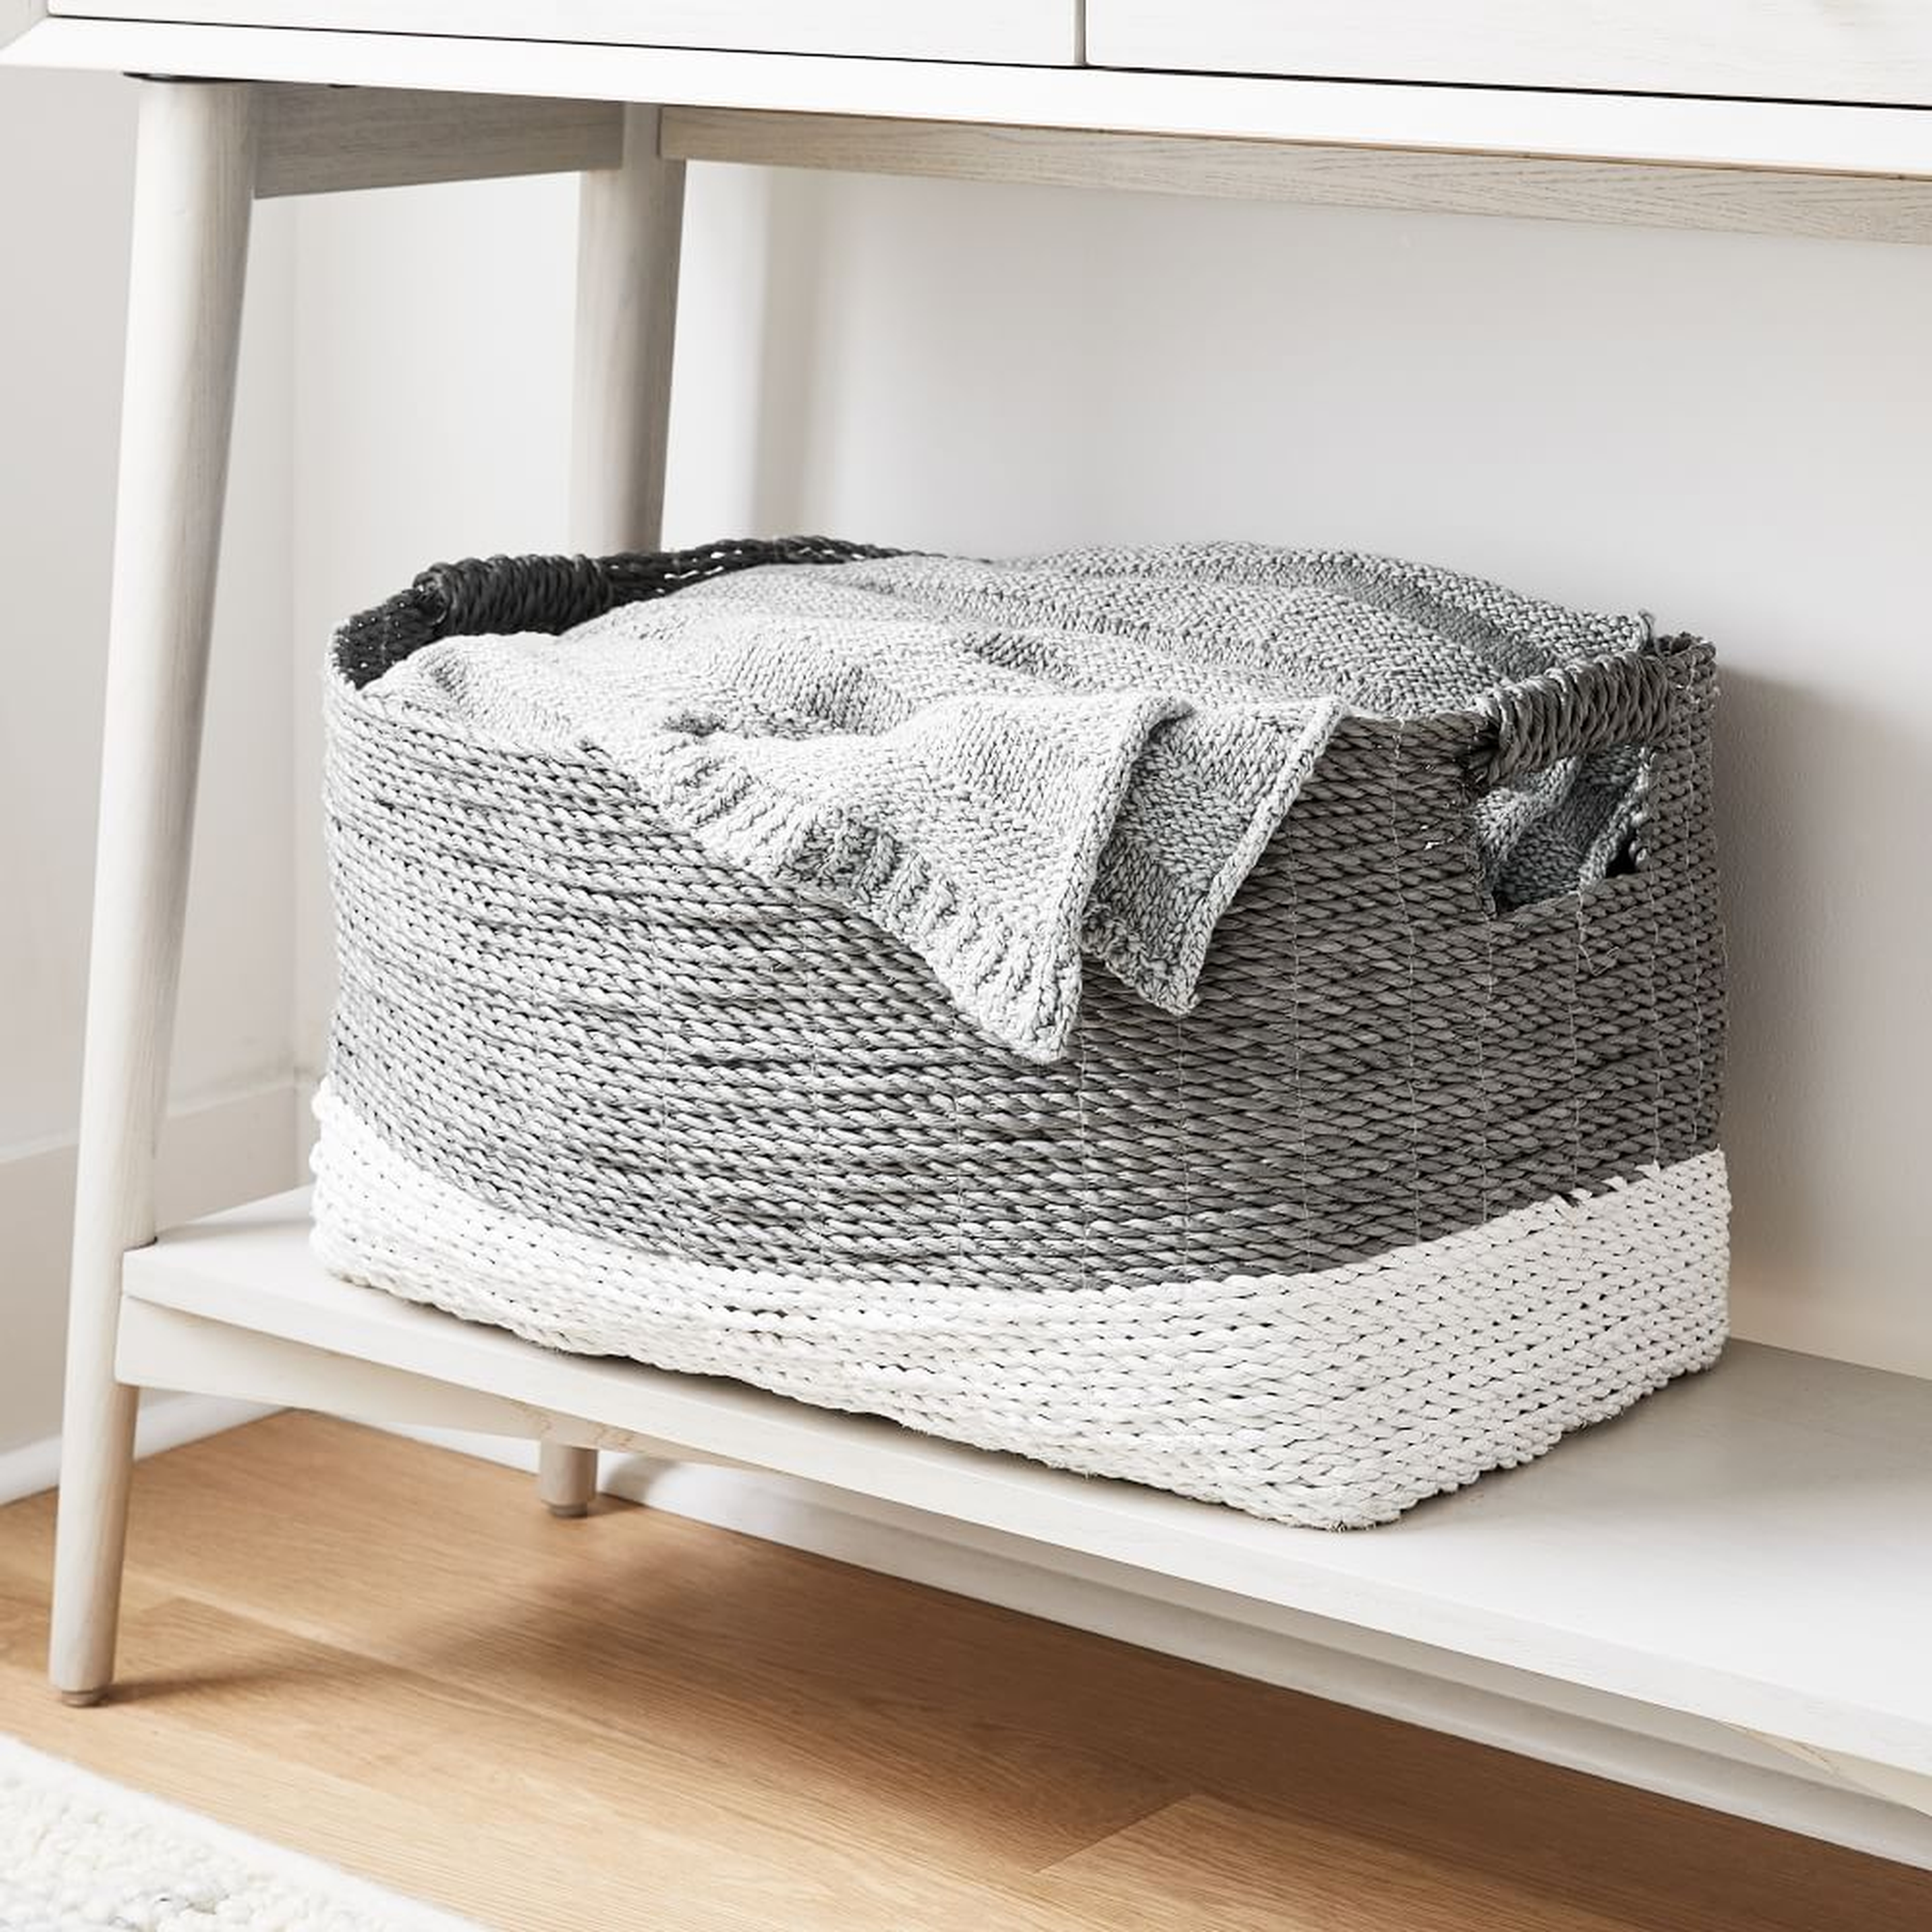 Two-Tone Woven Basket, Gray/White, Console - West Elm